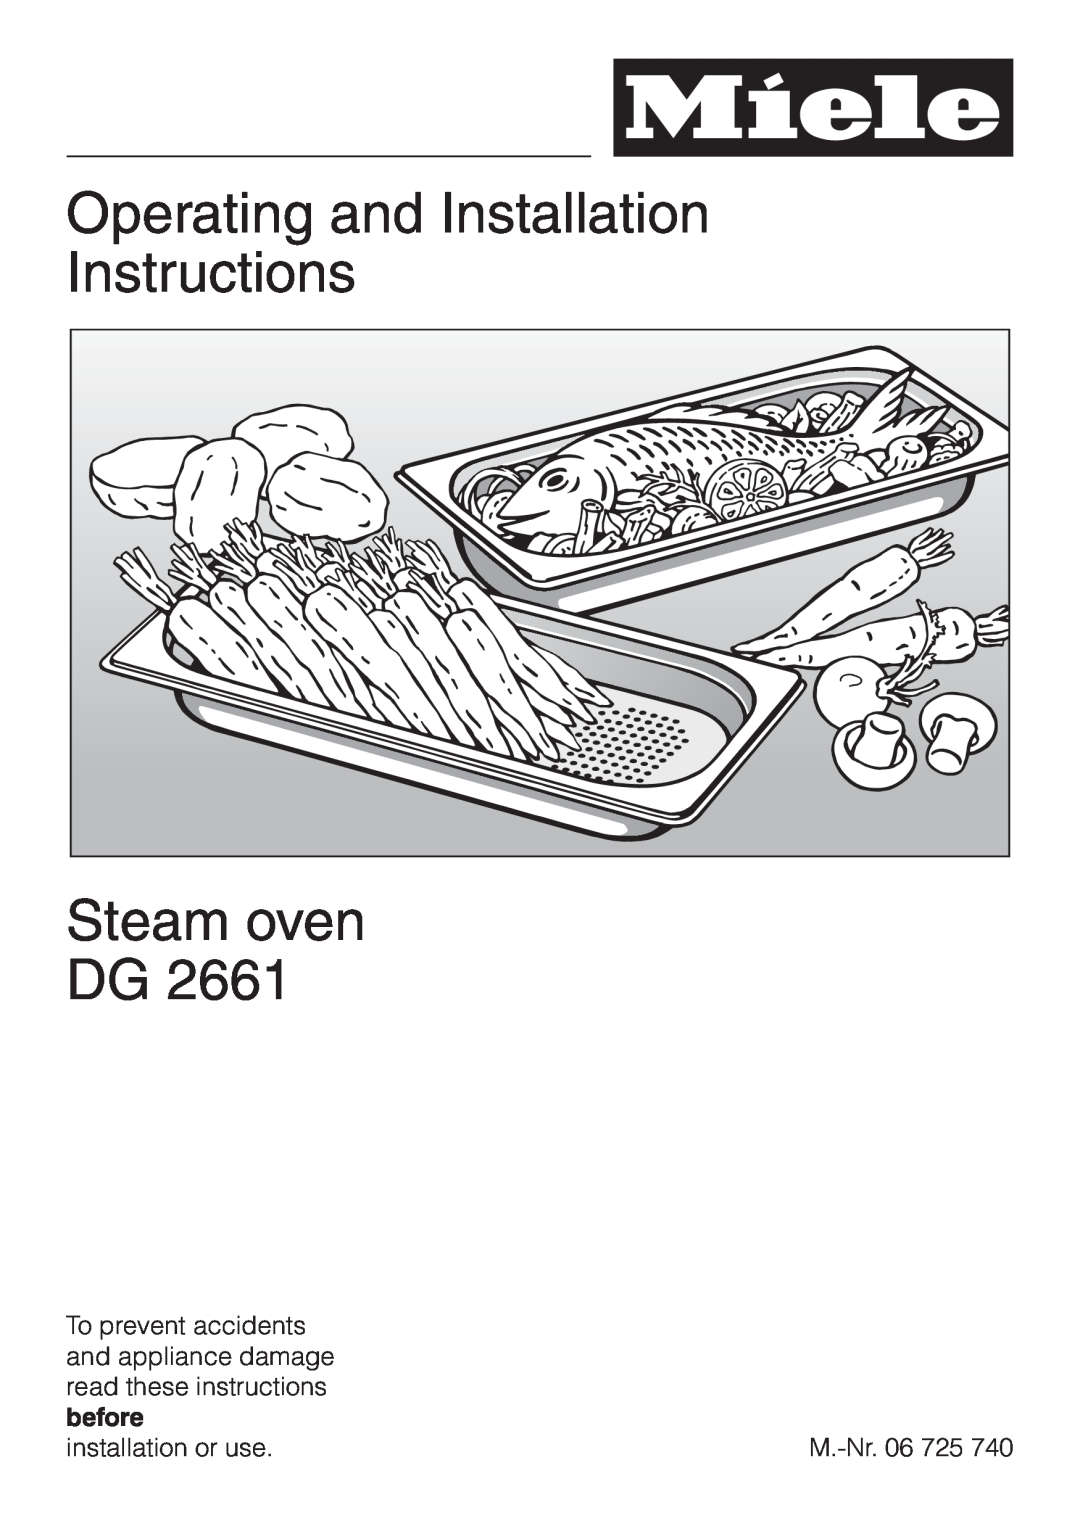 Miele DG 2661 installation instructions Operating and Installation Instructions, Steam oven DG, before 